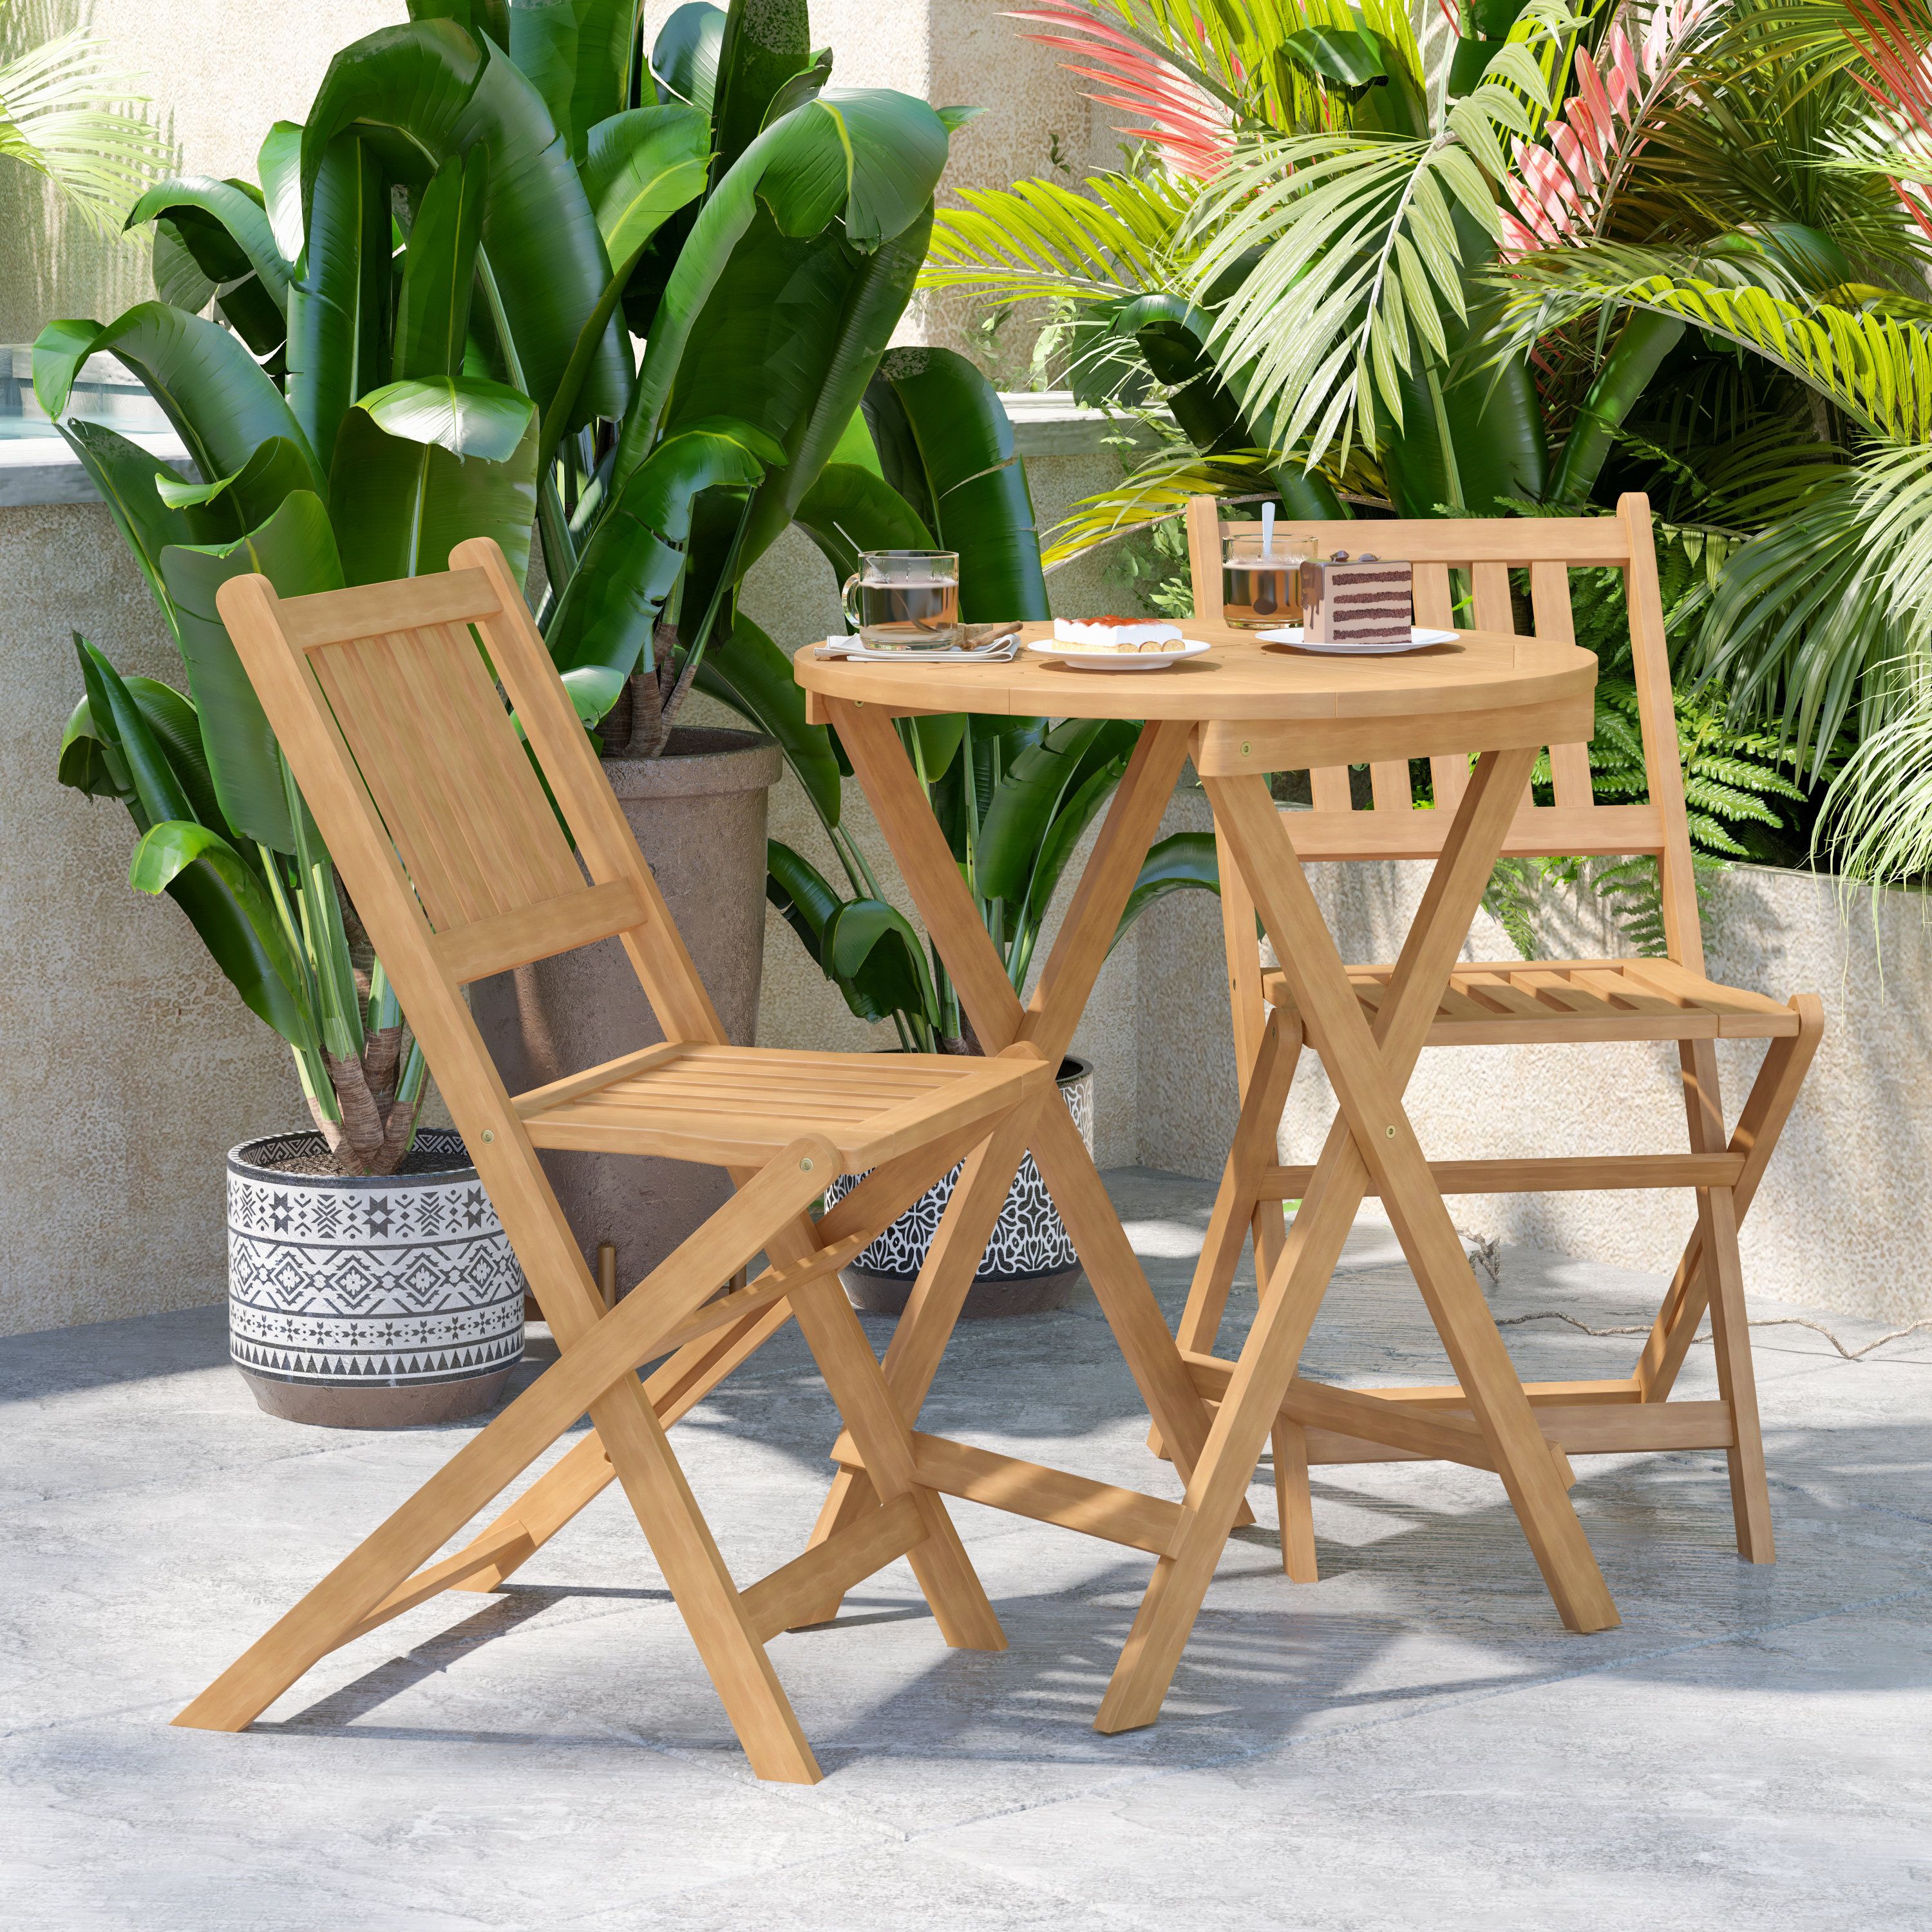 Winston Porter Edil Indoor/outdoor Acacia Wood Folding Table And 2 Chair  Bistro Set & Reviews | Wayfair Inside Acacia Wood With Table Garden Wooden Furniture (View 4 of 15)